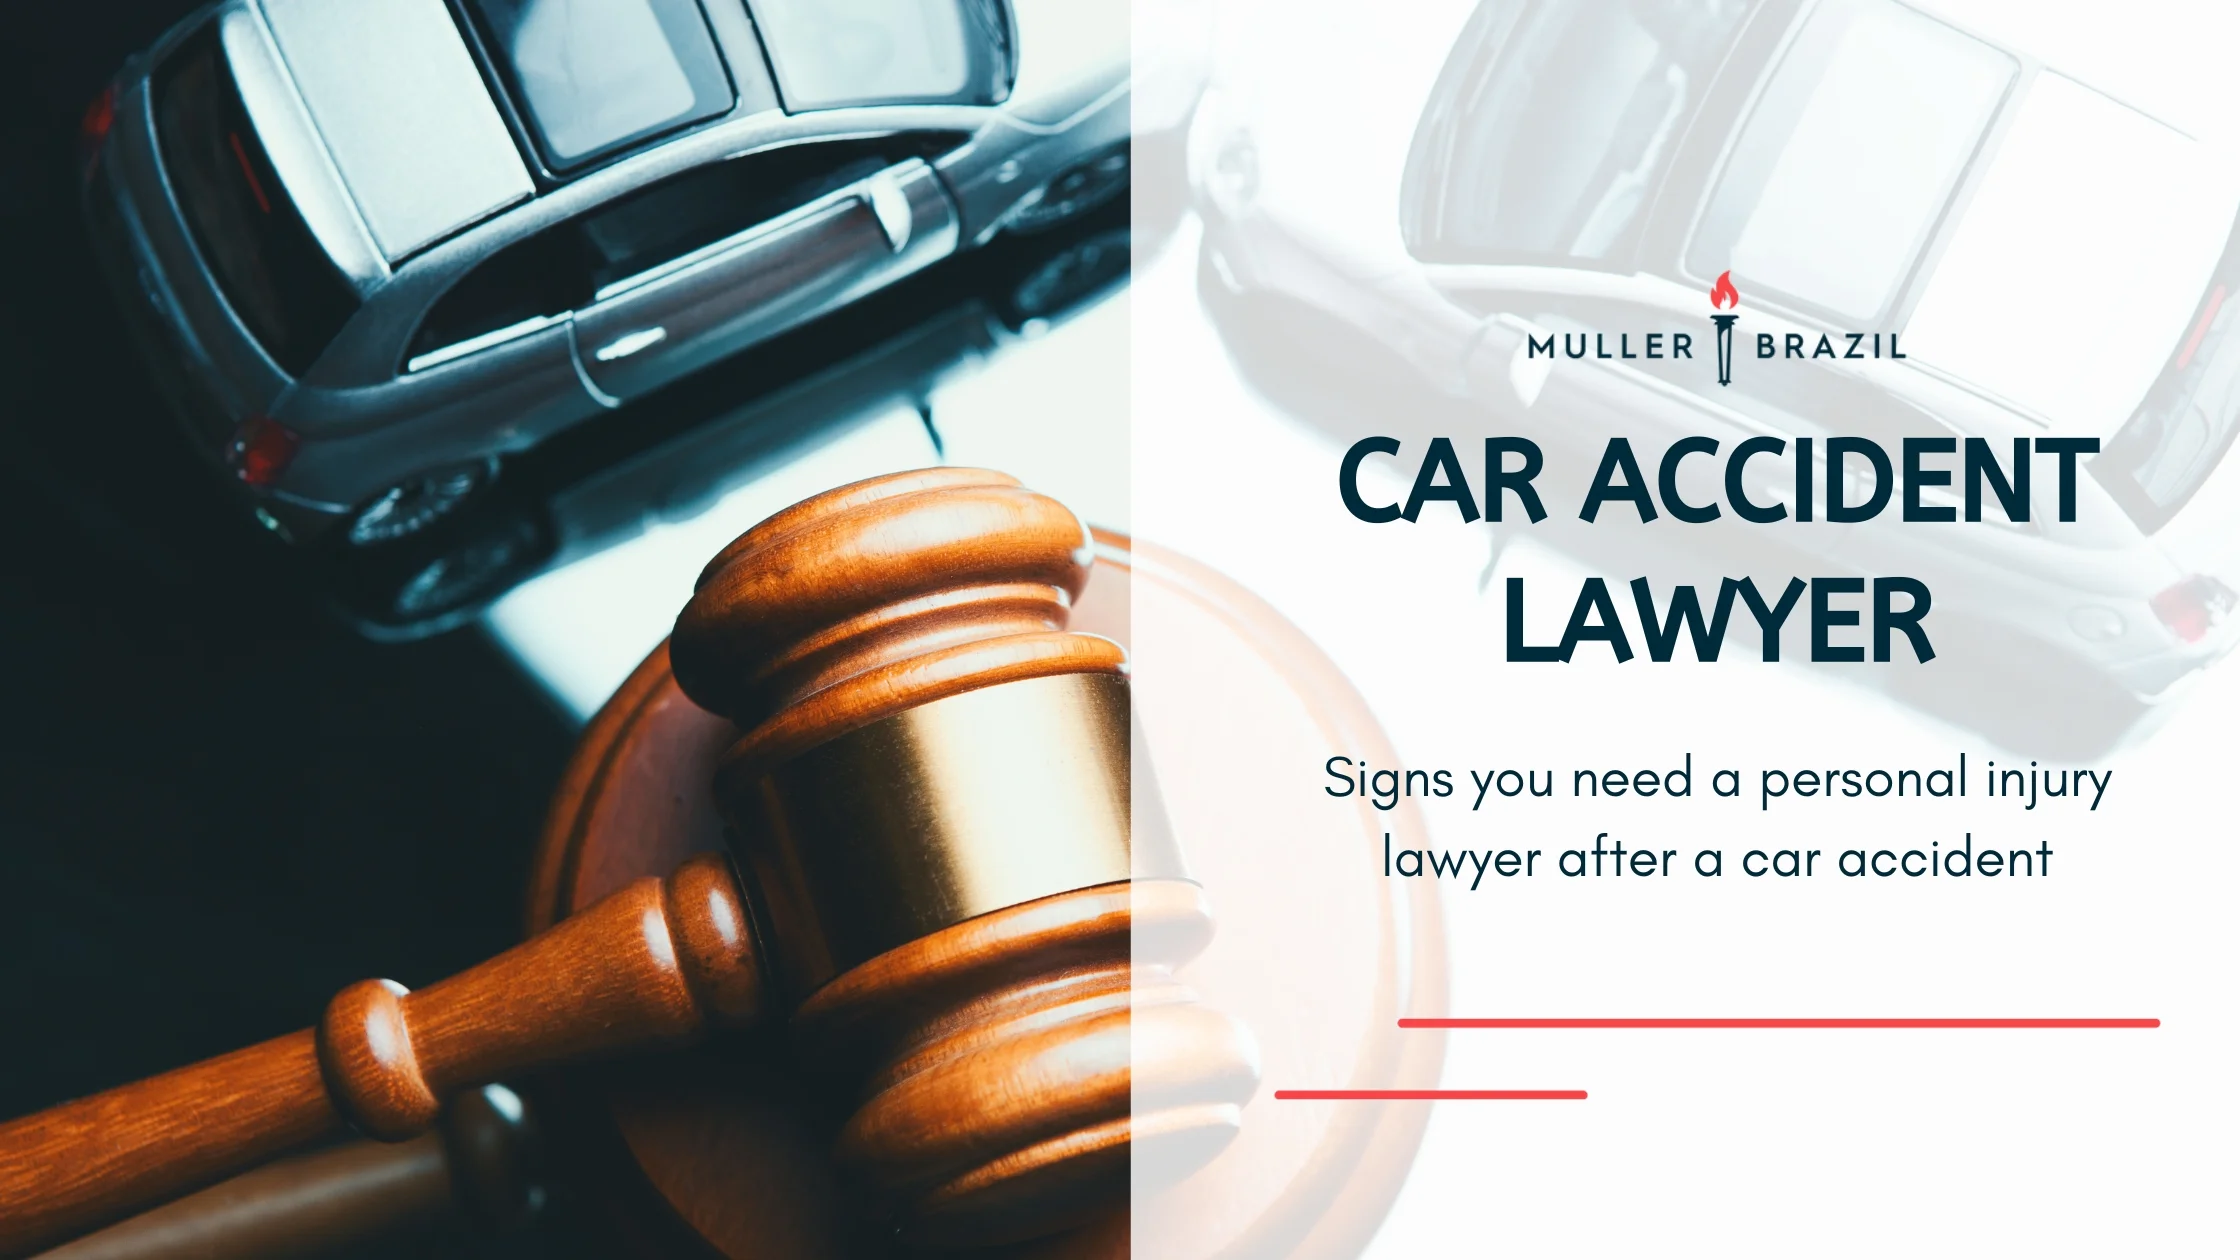 Blog featured image of a brown gavel beside two cars and a caption that says “Car Accident Lawyer